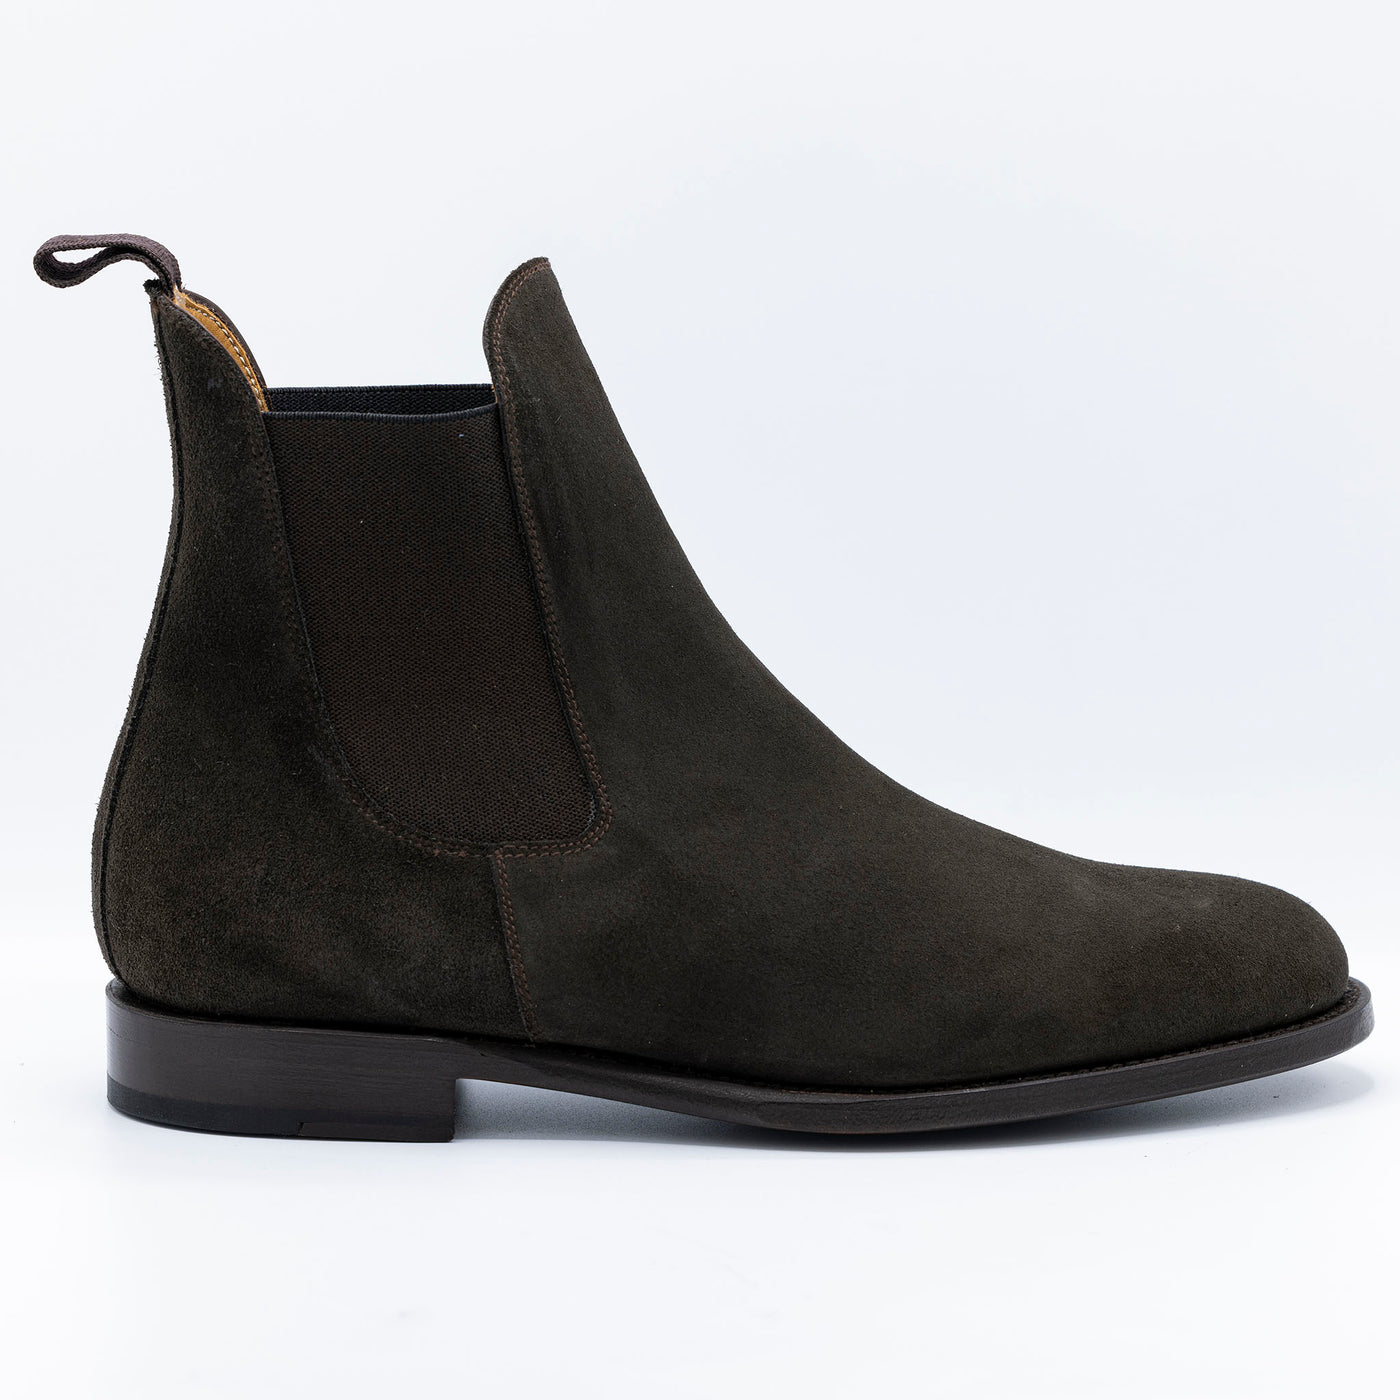 Men's brown suede chelsea boots. Set on leather soles with elastic panels. 